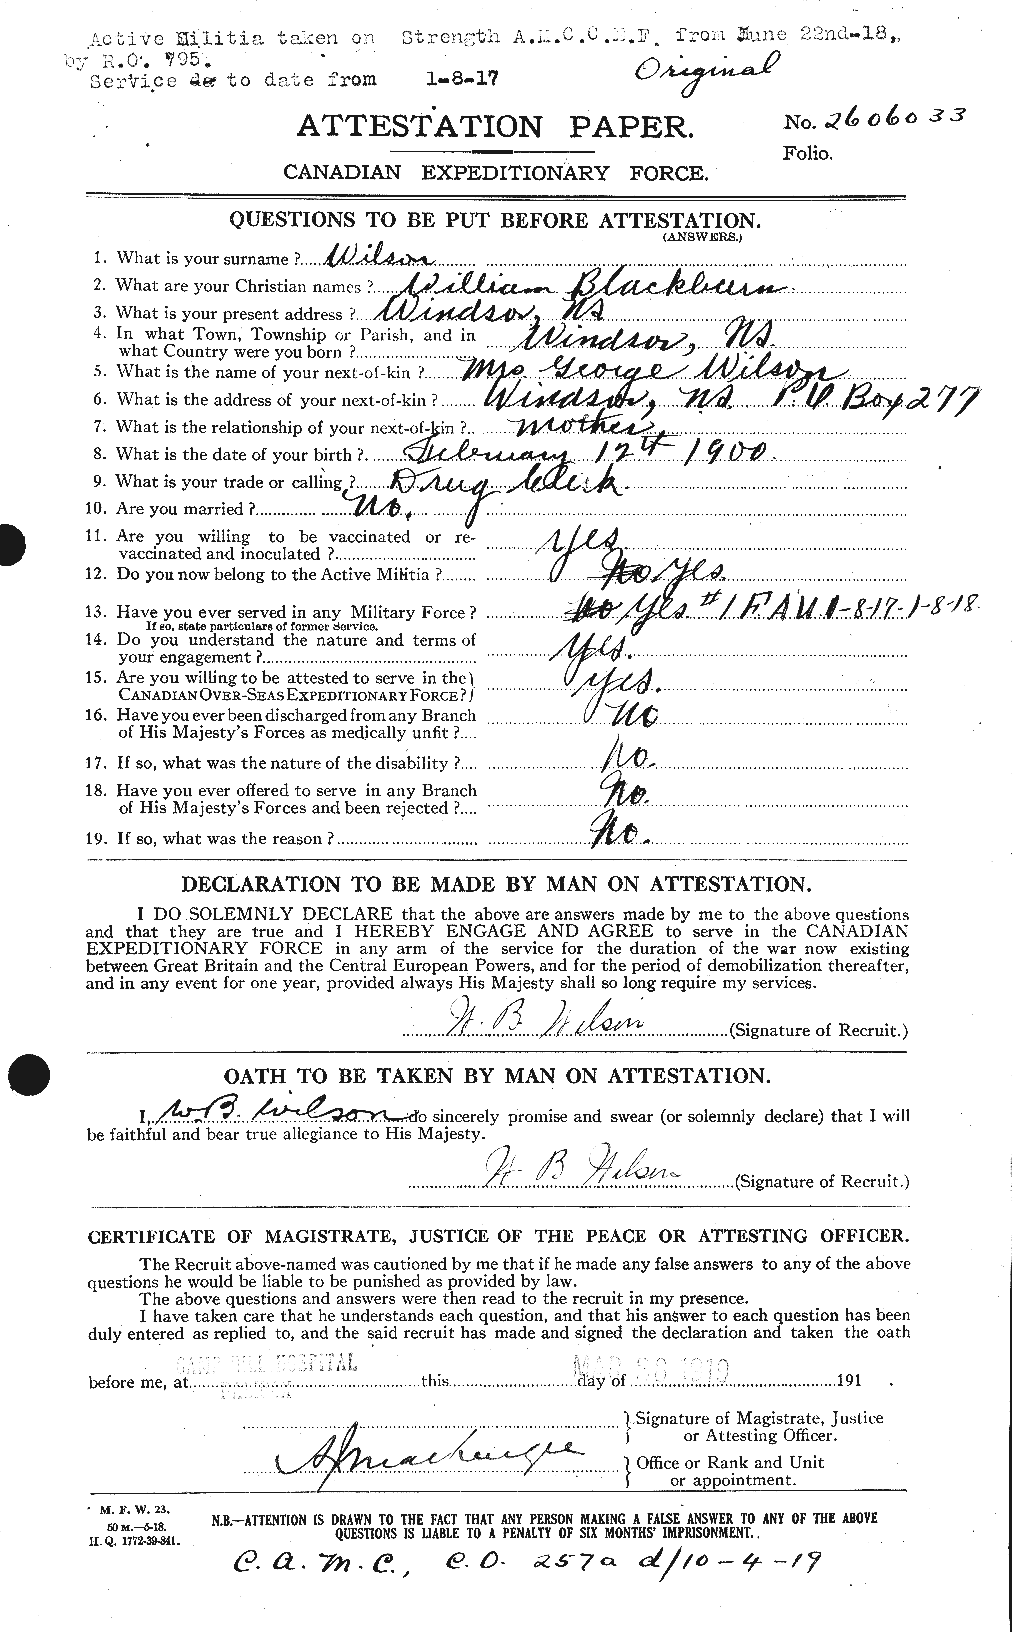 Personnel Records of the First World War - CEF 681942a